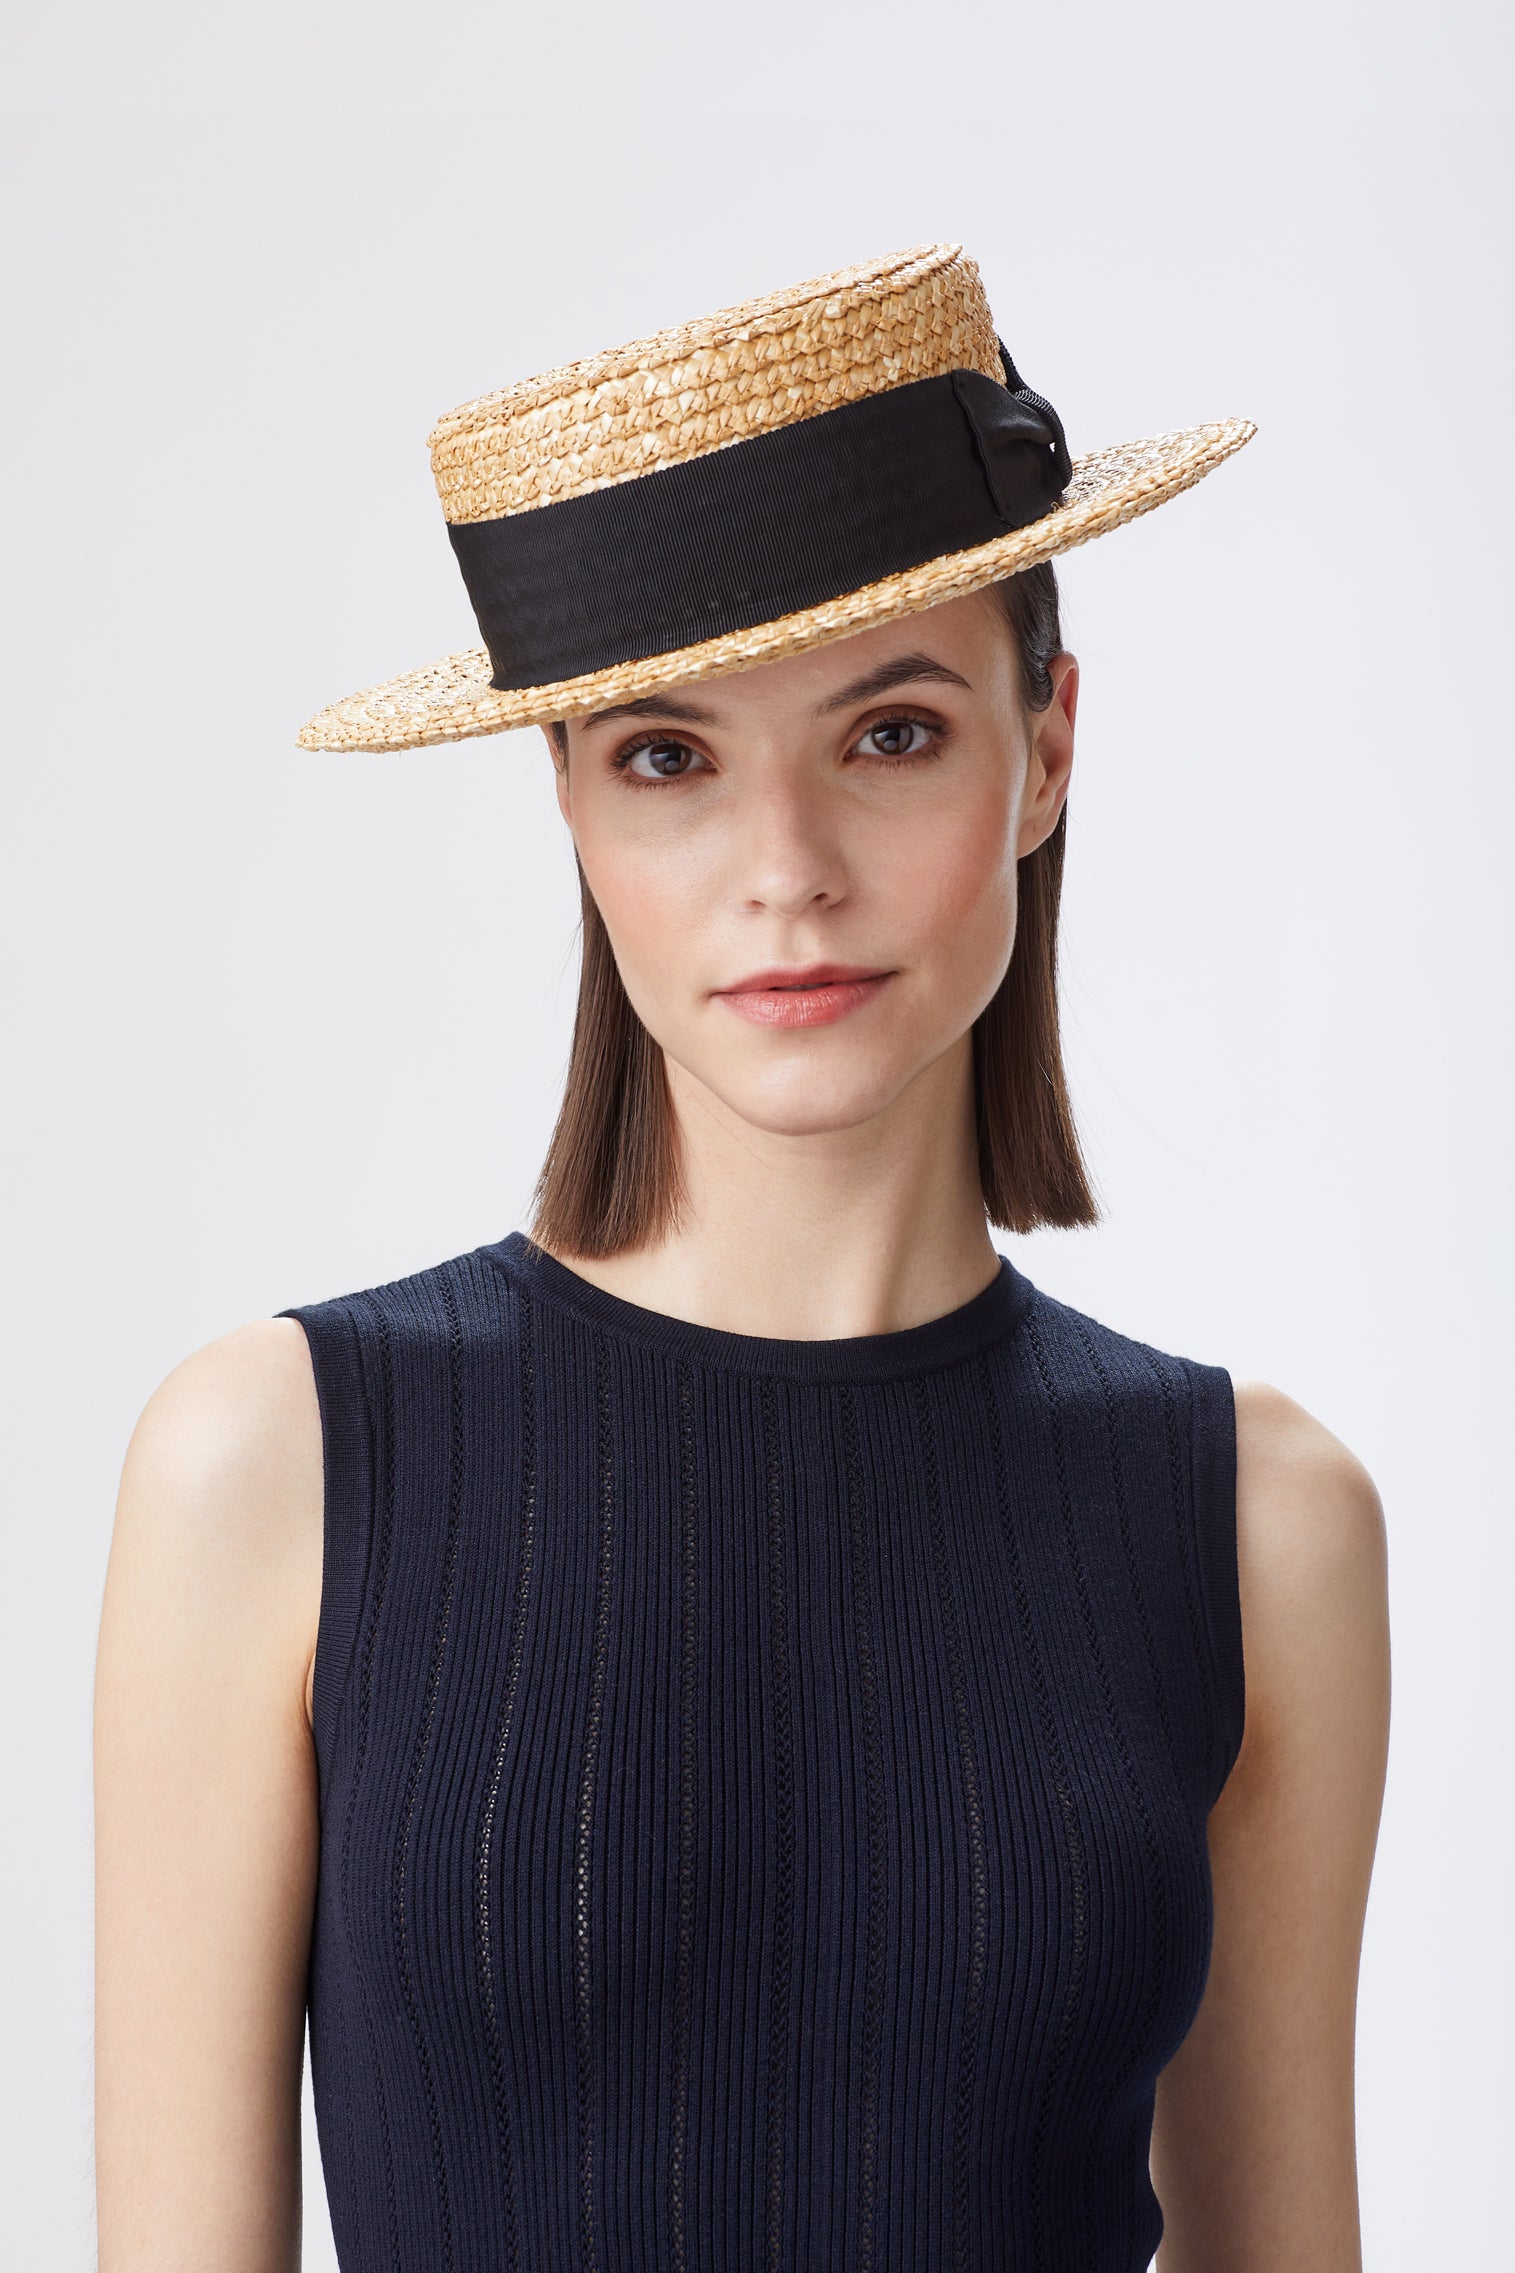 Classic Boater - Hats for Oval Face Shapes - Lock & Co. Hatters London UK